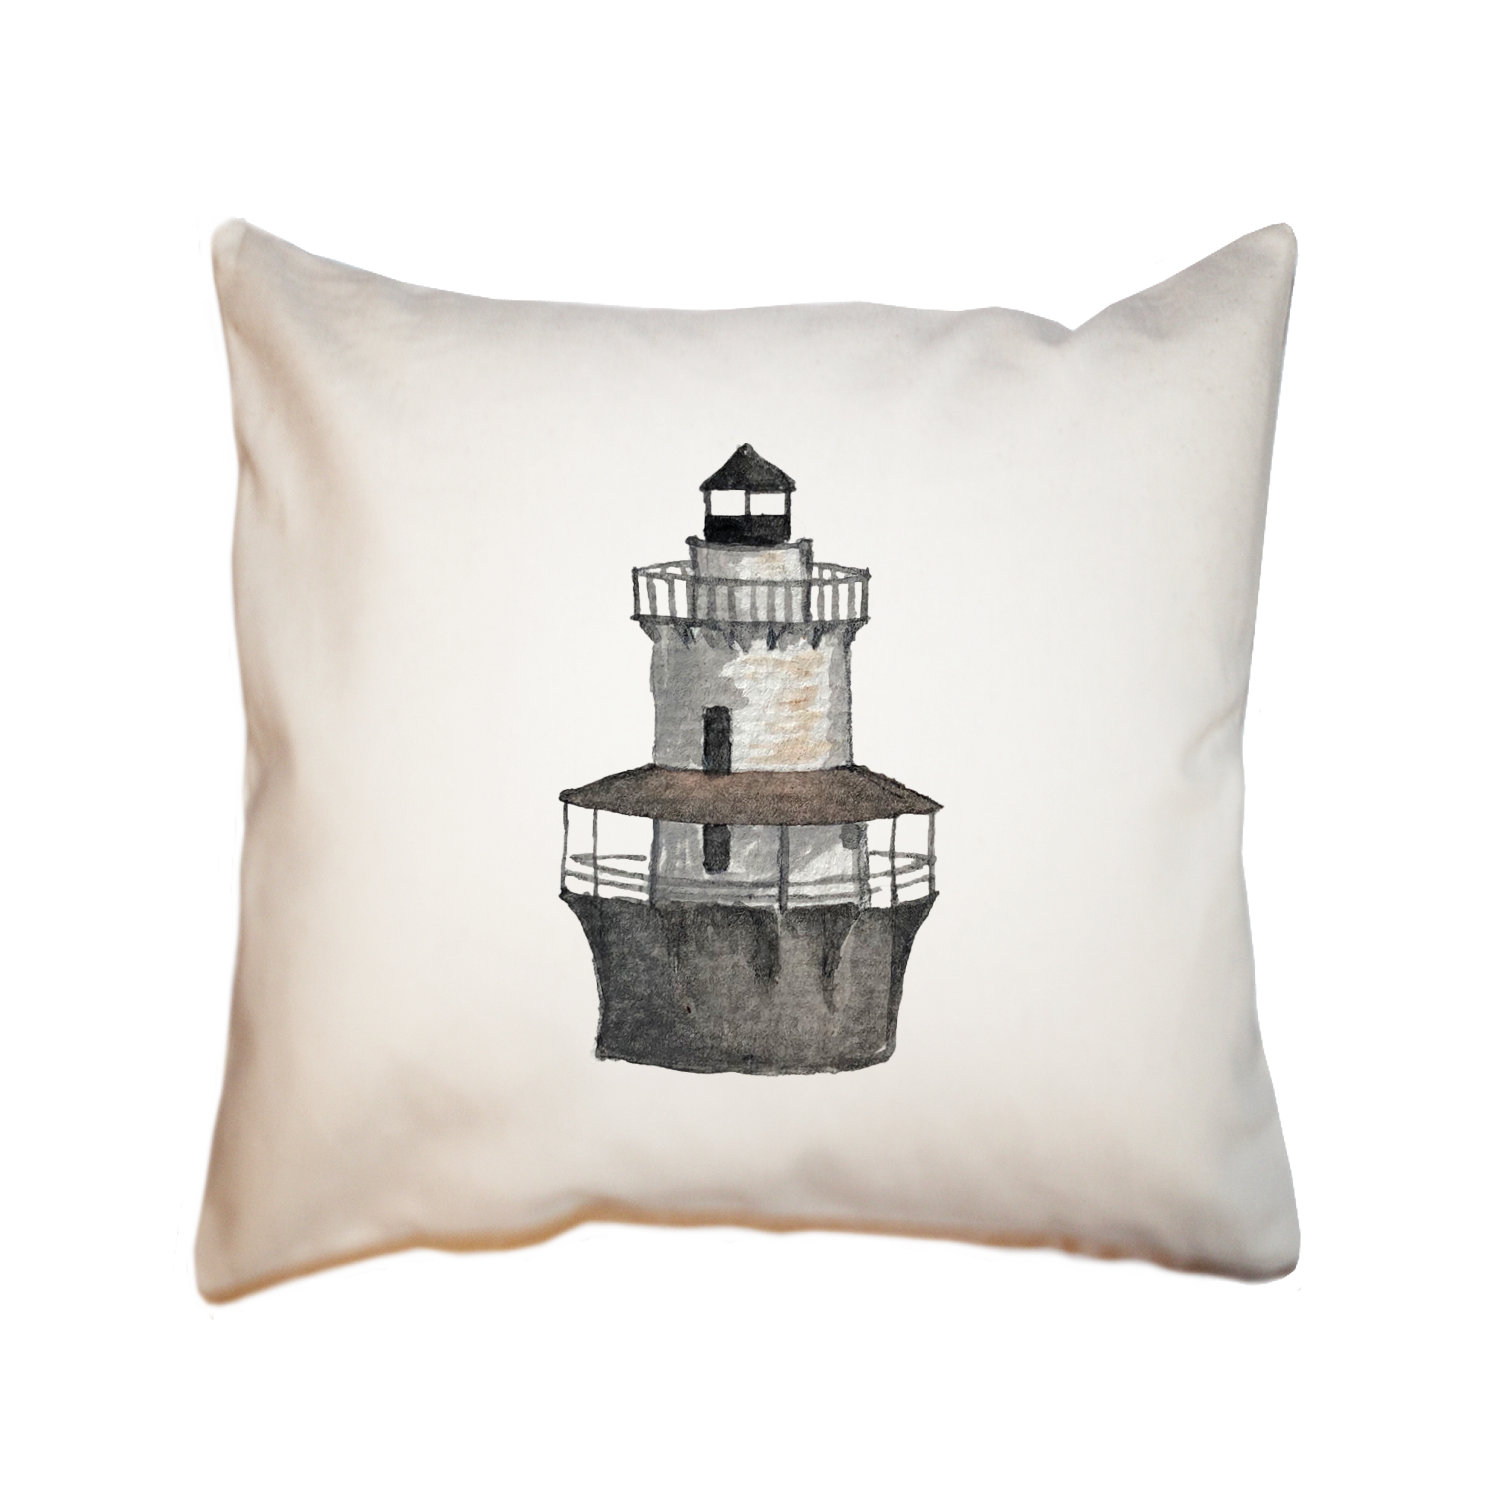 fairhaven, ma lighthouse square pillow